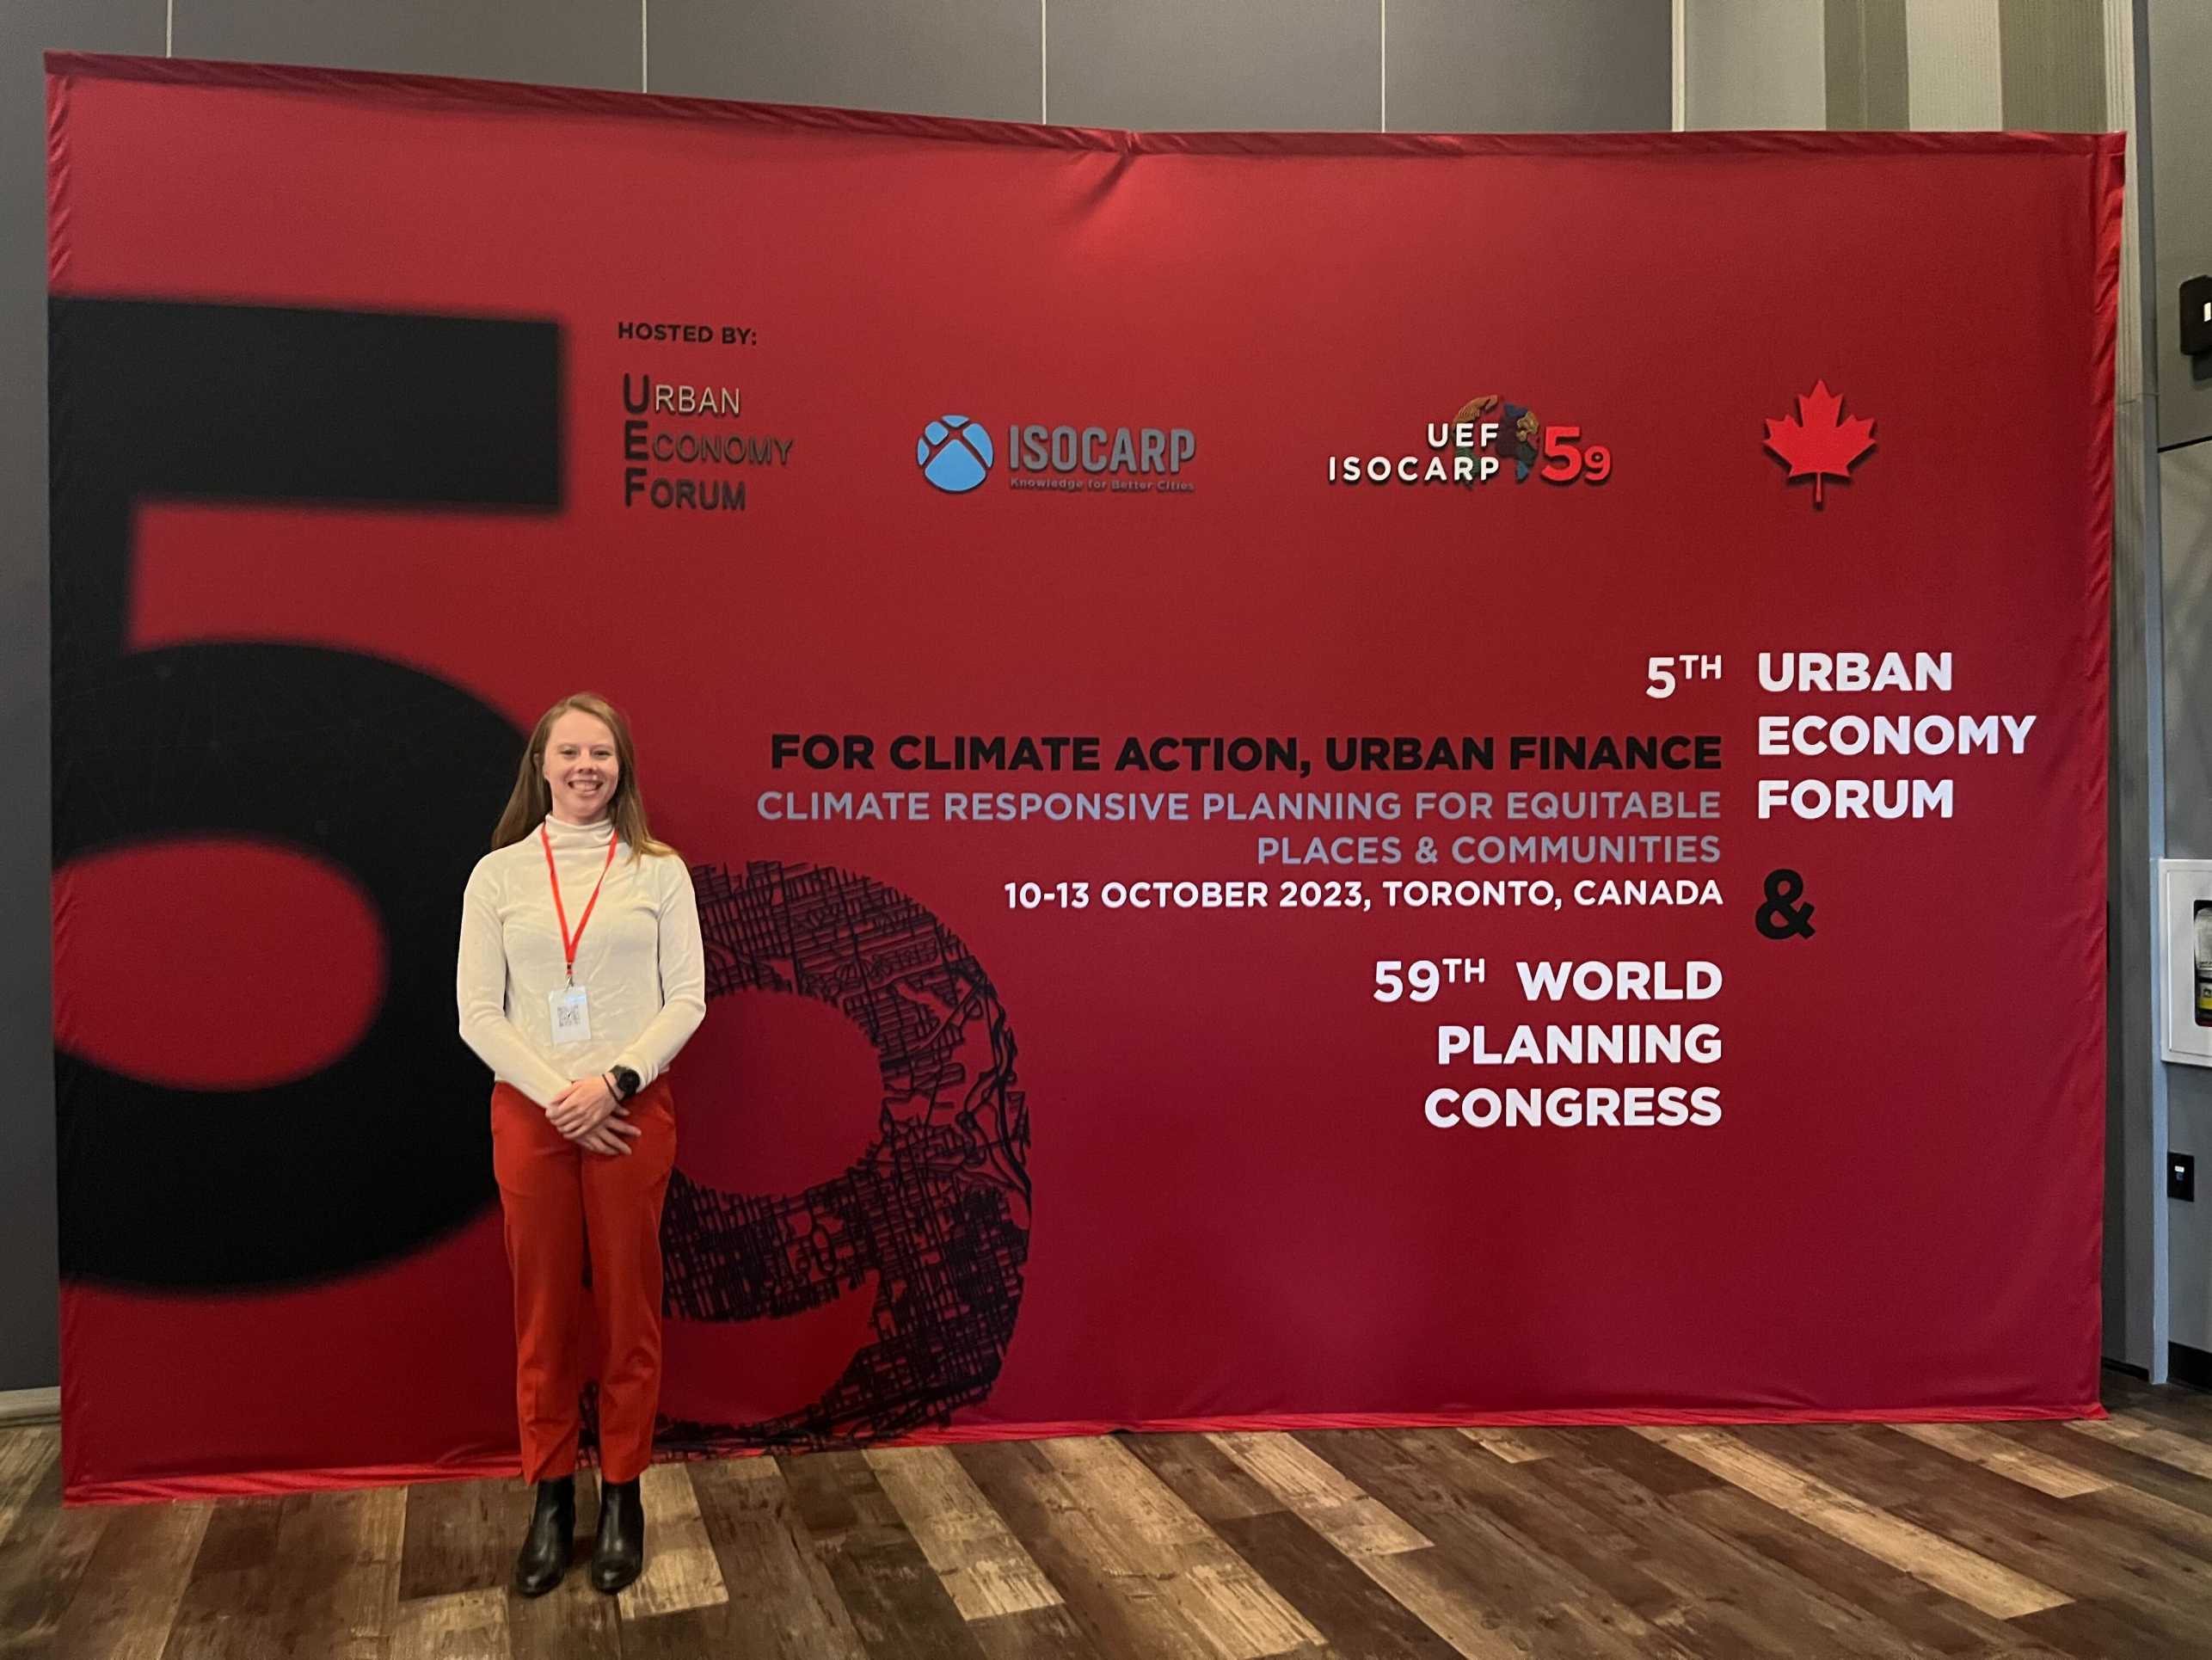 Kate at World Planning Congress and Urban Economy Forum